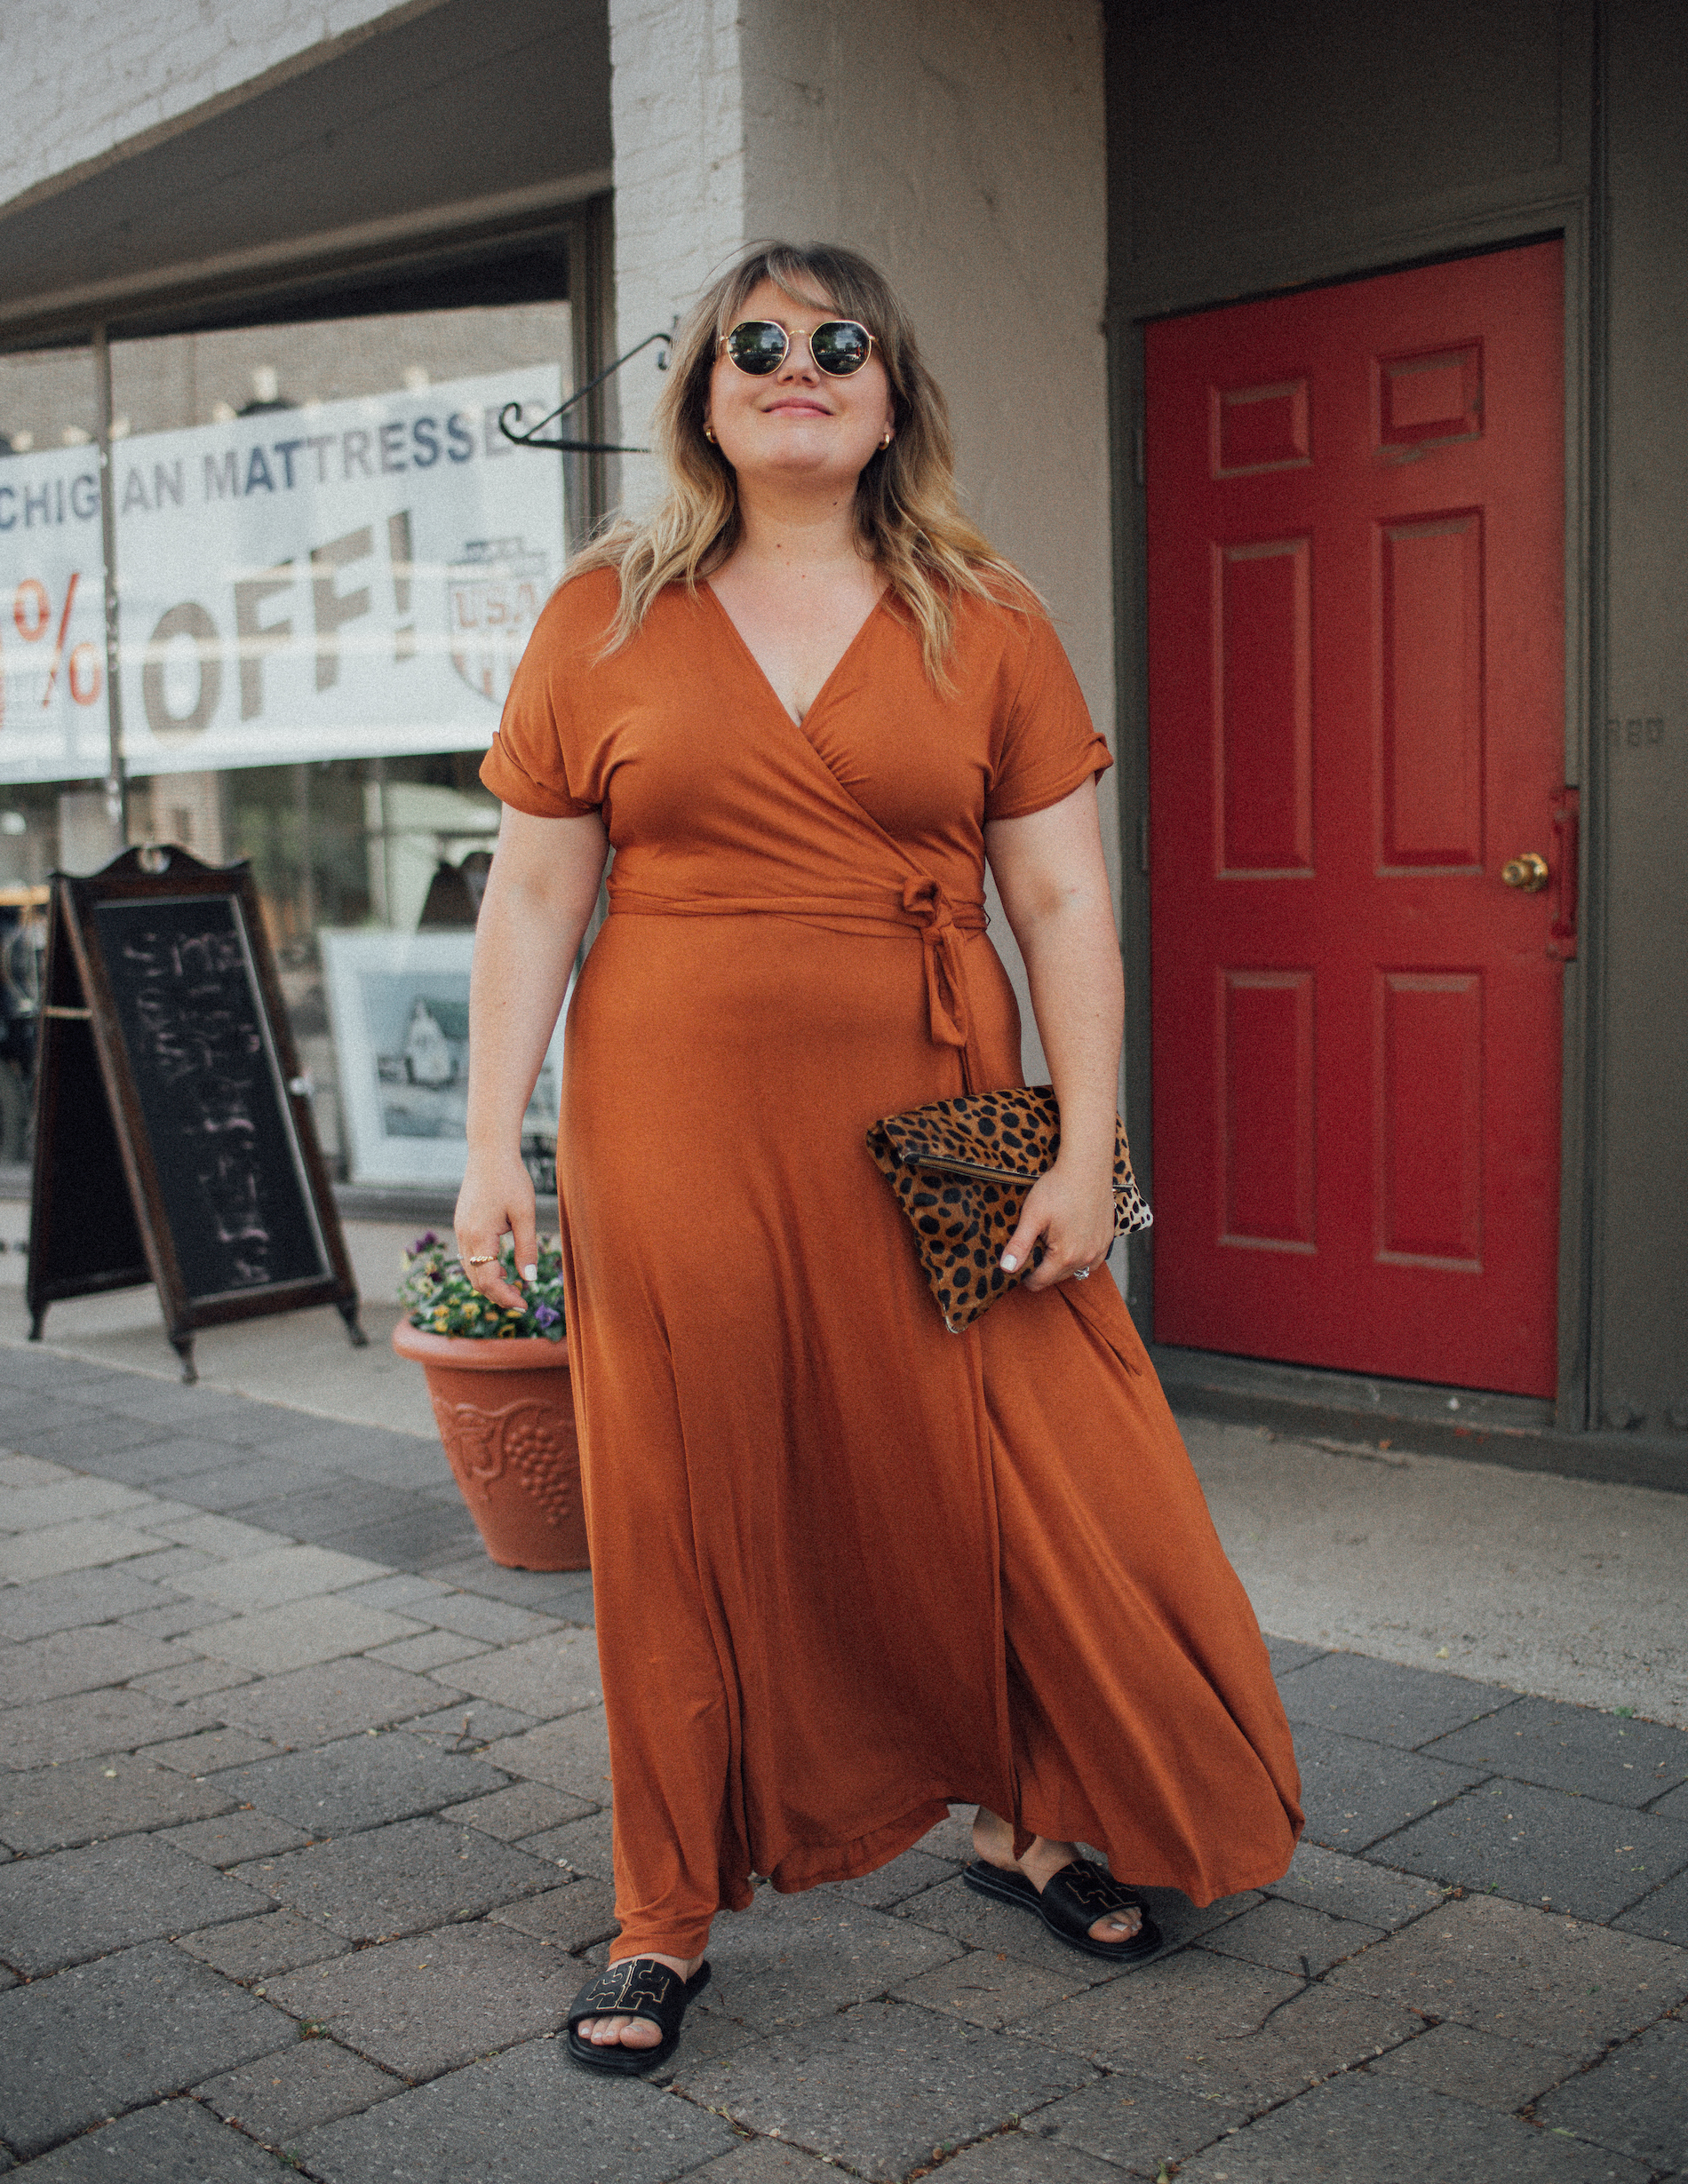 Thats a Wrap Dress. Sharing a roundup of plus size wrap dresses perfect for summer dressing! Having a wrap dress in your closet is key! 